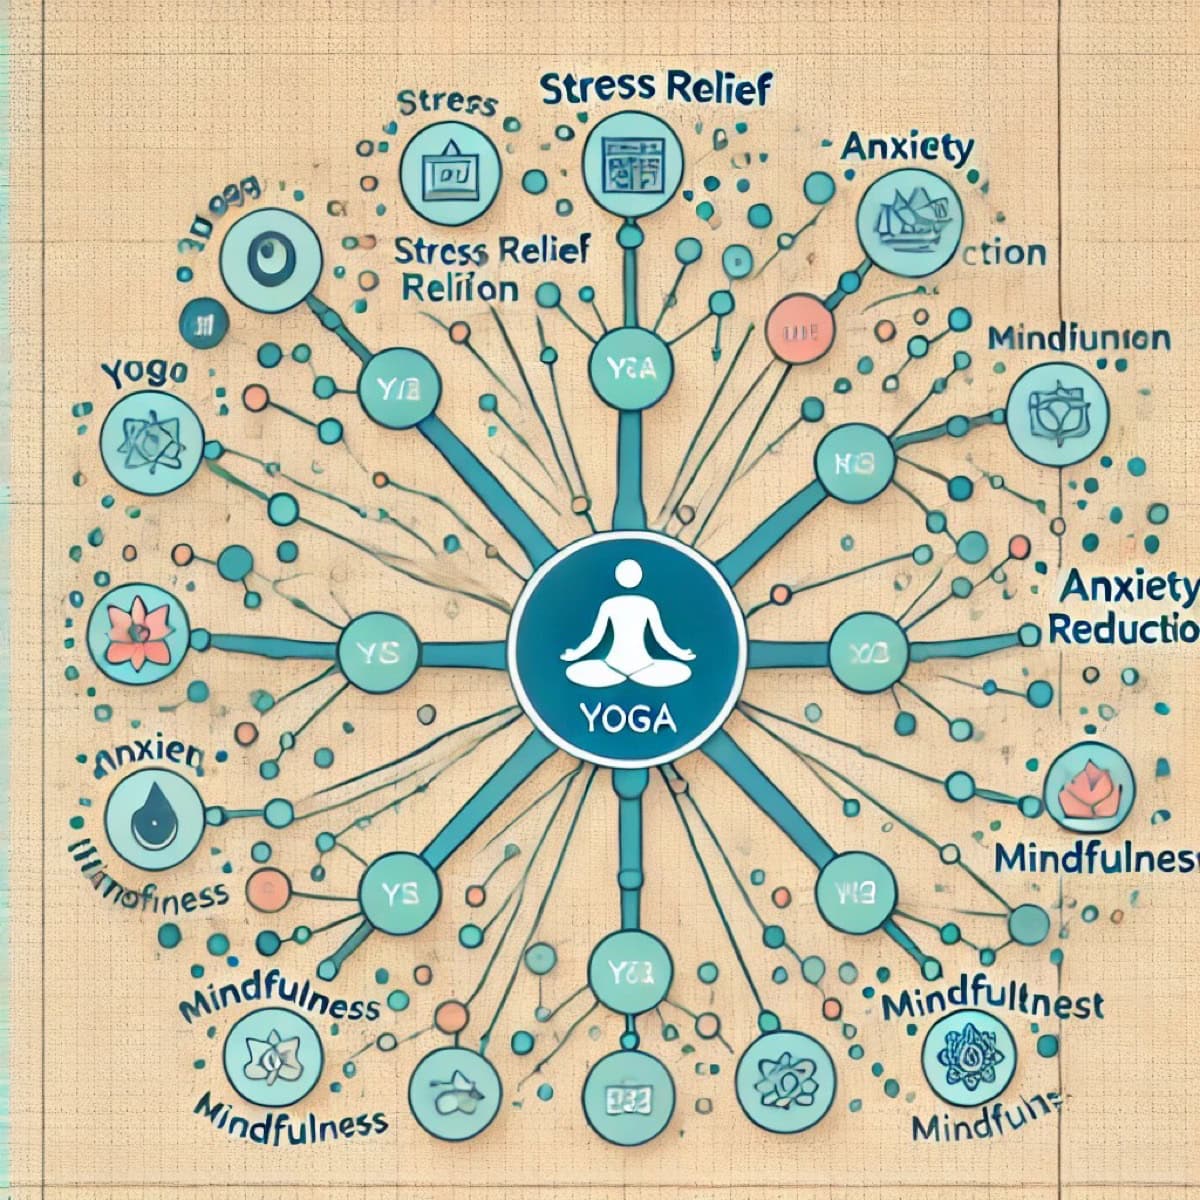 A mind map diagram titled "Yoga" at the center, with branches leading to various related concepts such as Stress Relief, Anxiety Reduction, and Mindfulness. Each main branch has sub-branches with related terms and icons, all on a textured beige background, allowing for an intuitive form of semantic search.